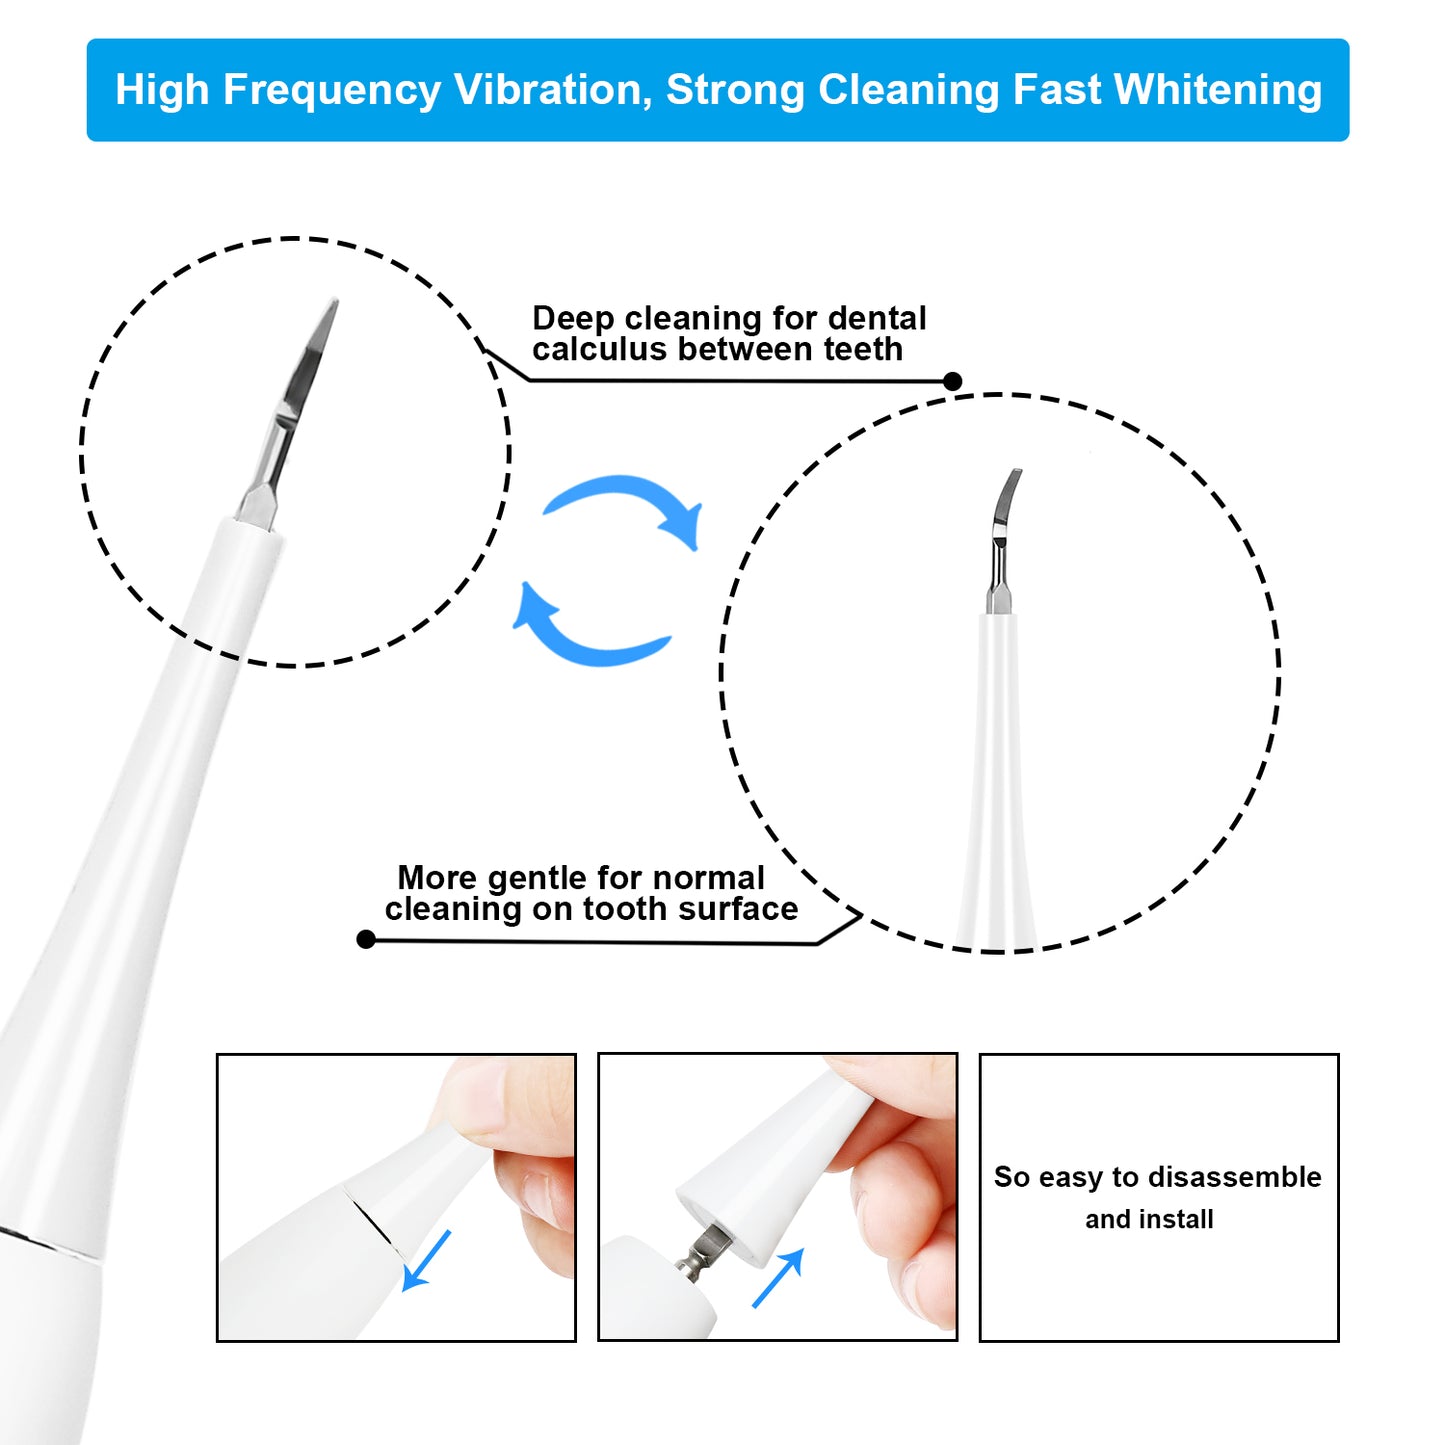 white electric dental calculus remover